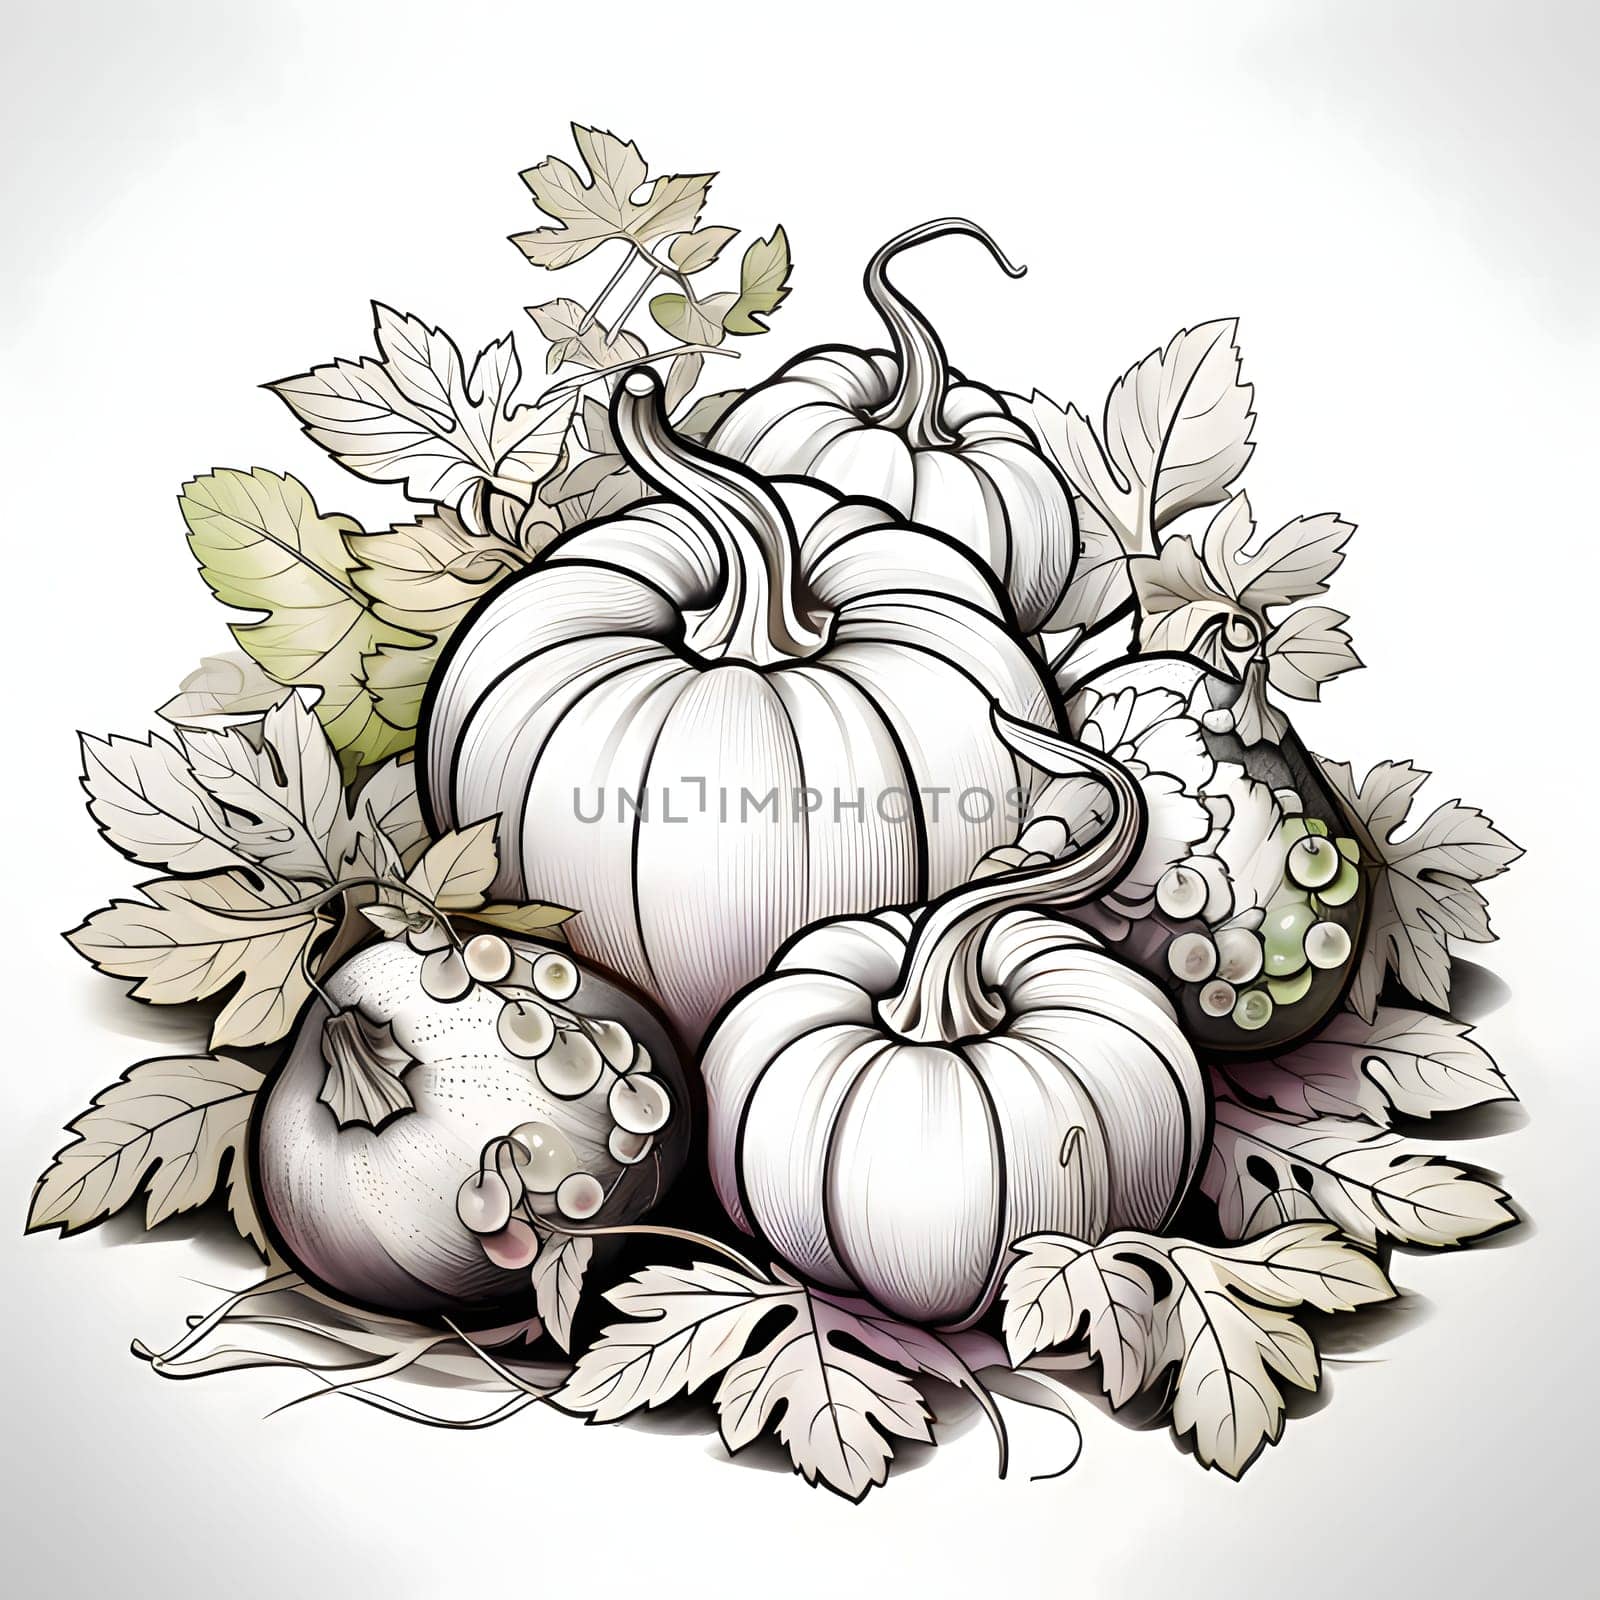 Black and white pumpkins with leaves. Pumpkin as a dish of thanksgiving for the harvest. by ThemesS